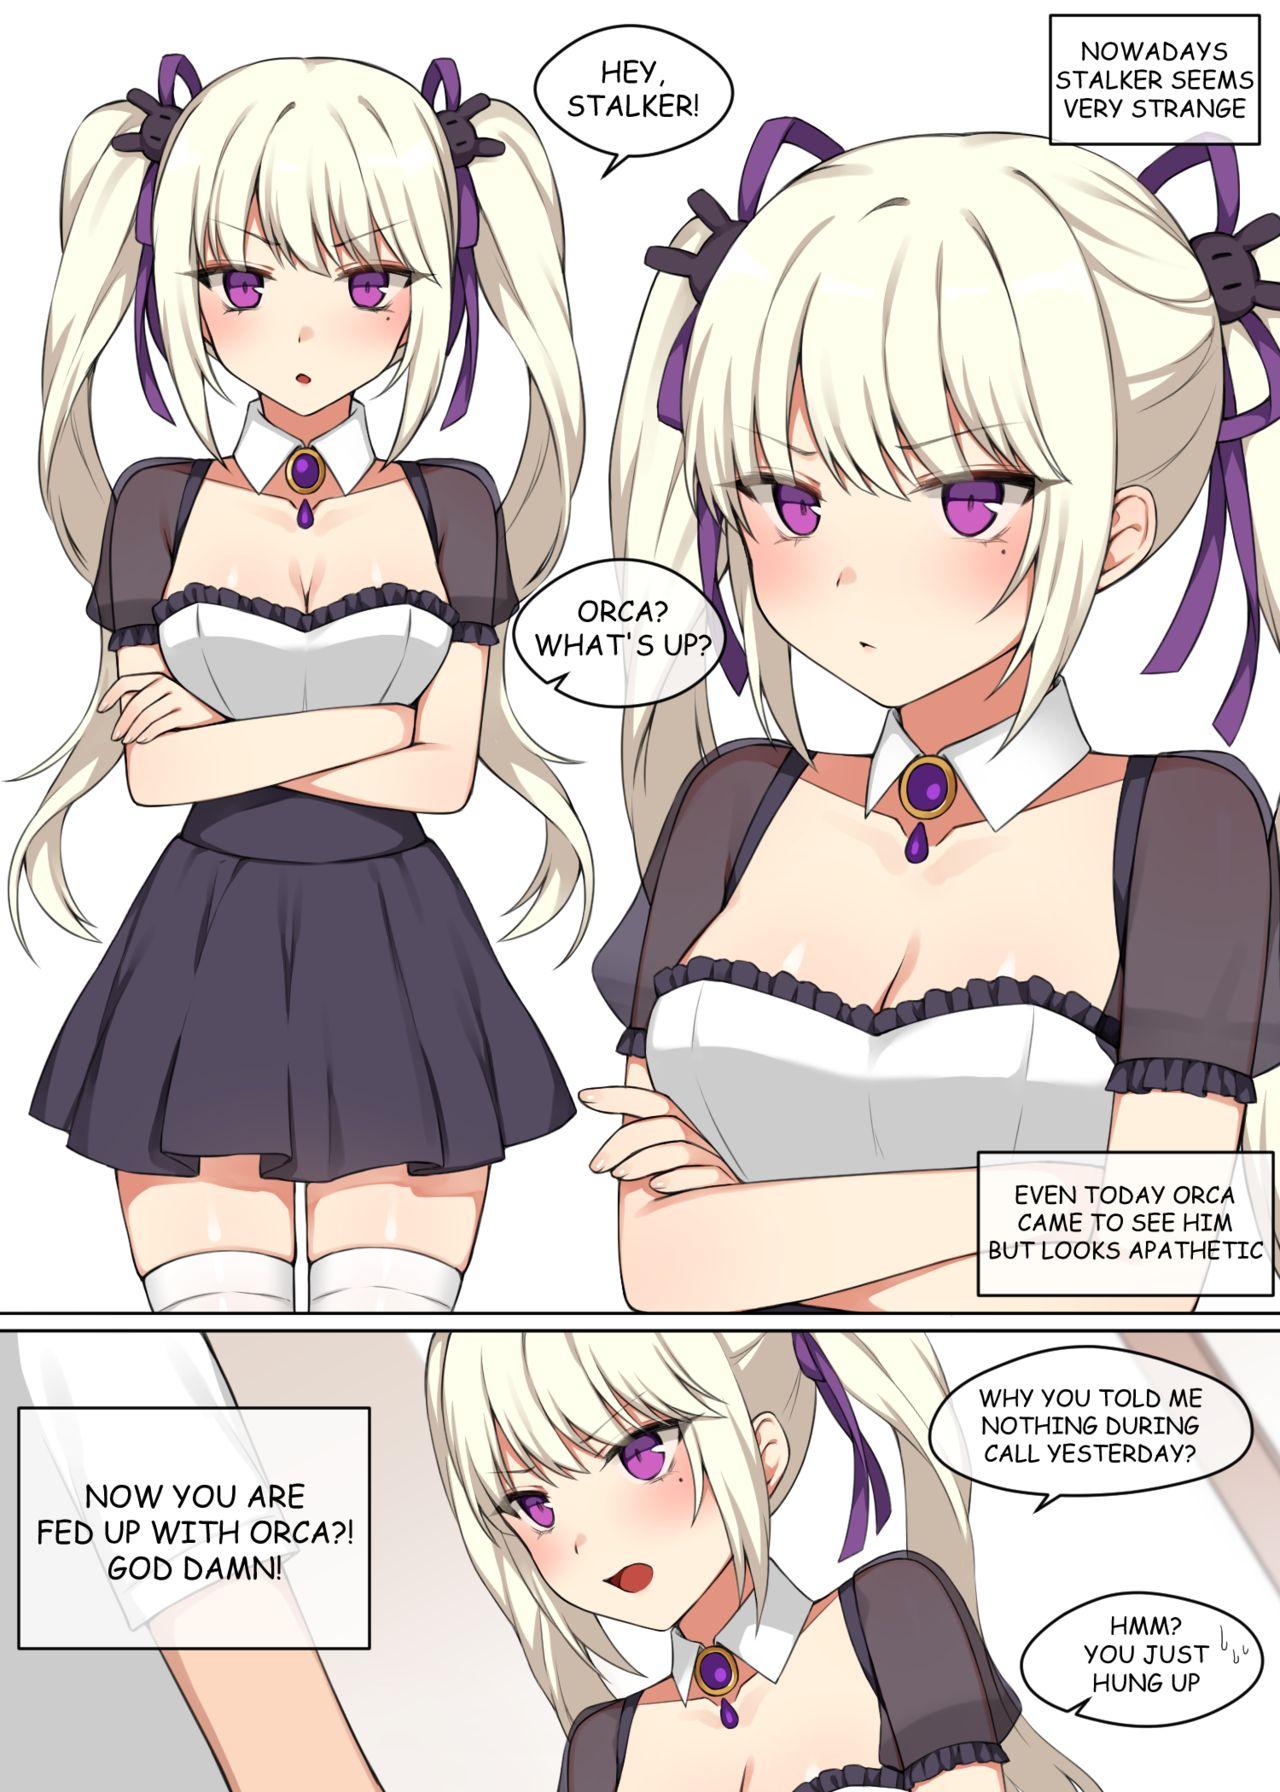 Prostituta 오르카는 관심이 필요해! / Orca needs your attention! Hot Girl - Page 2